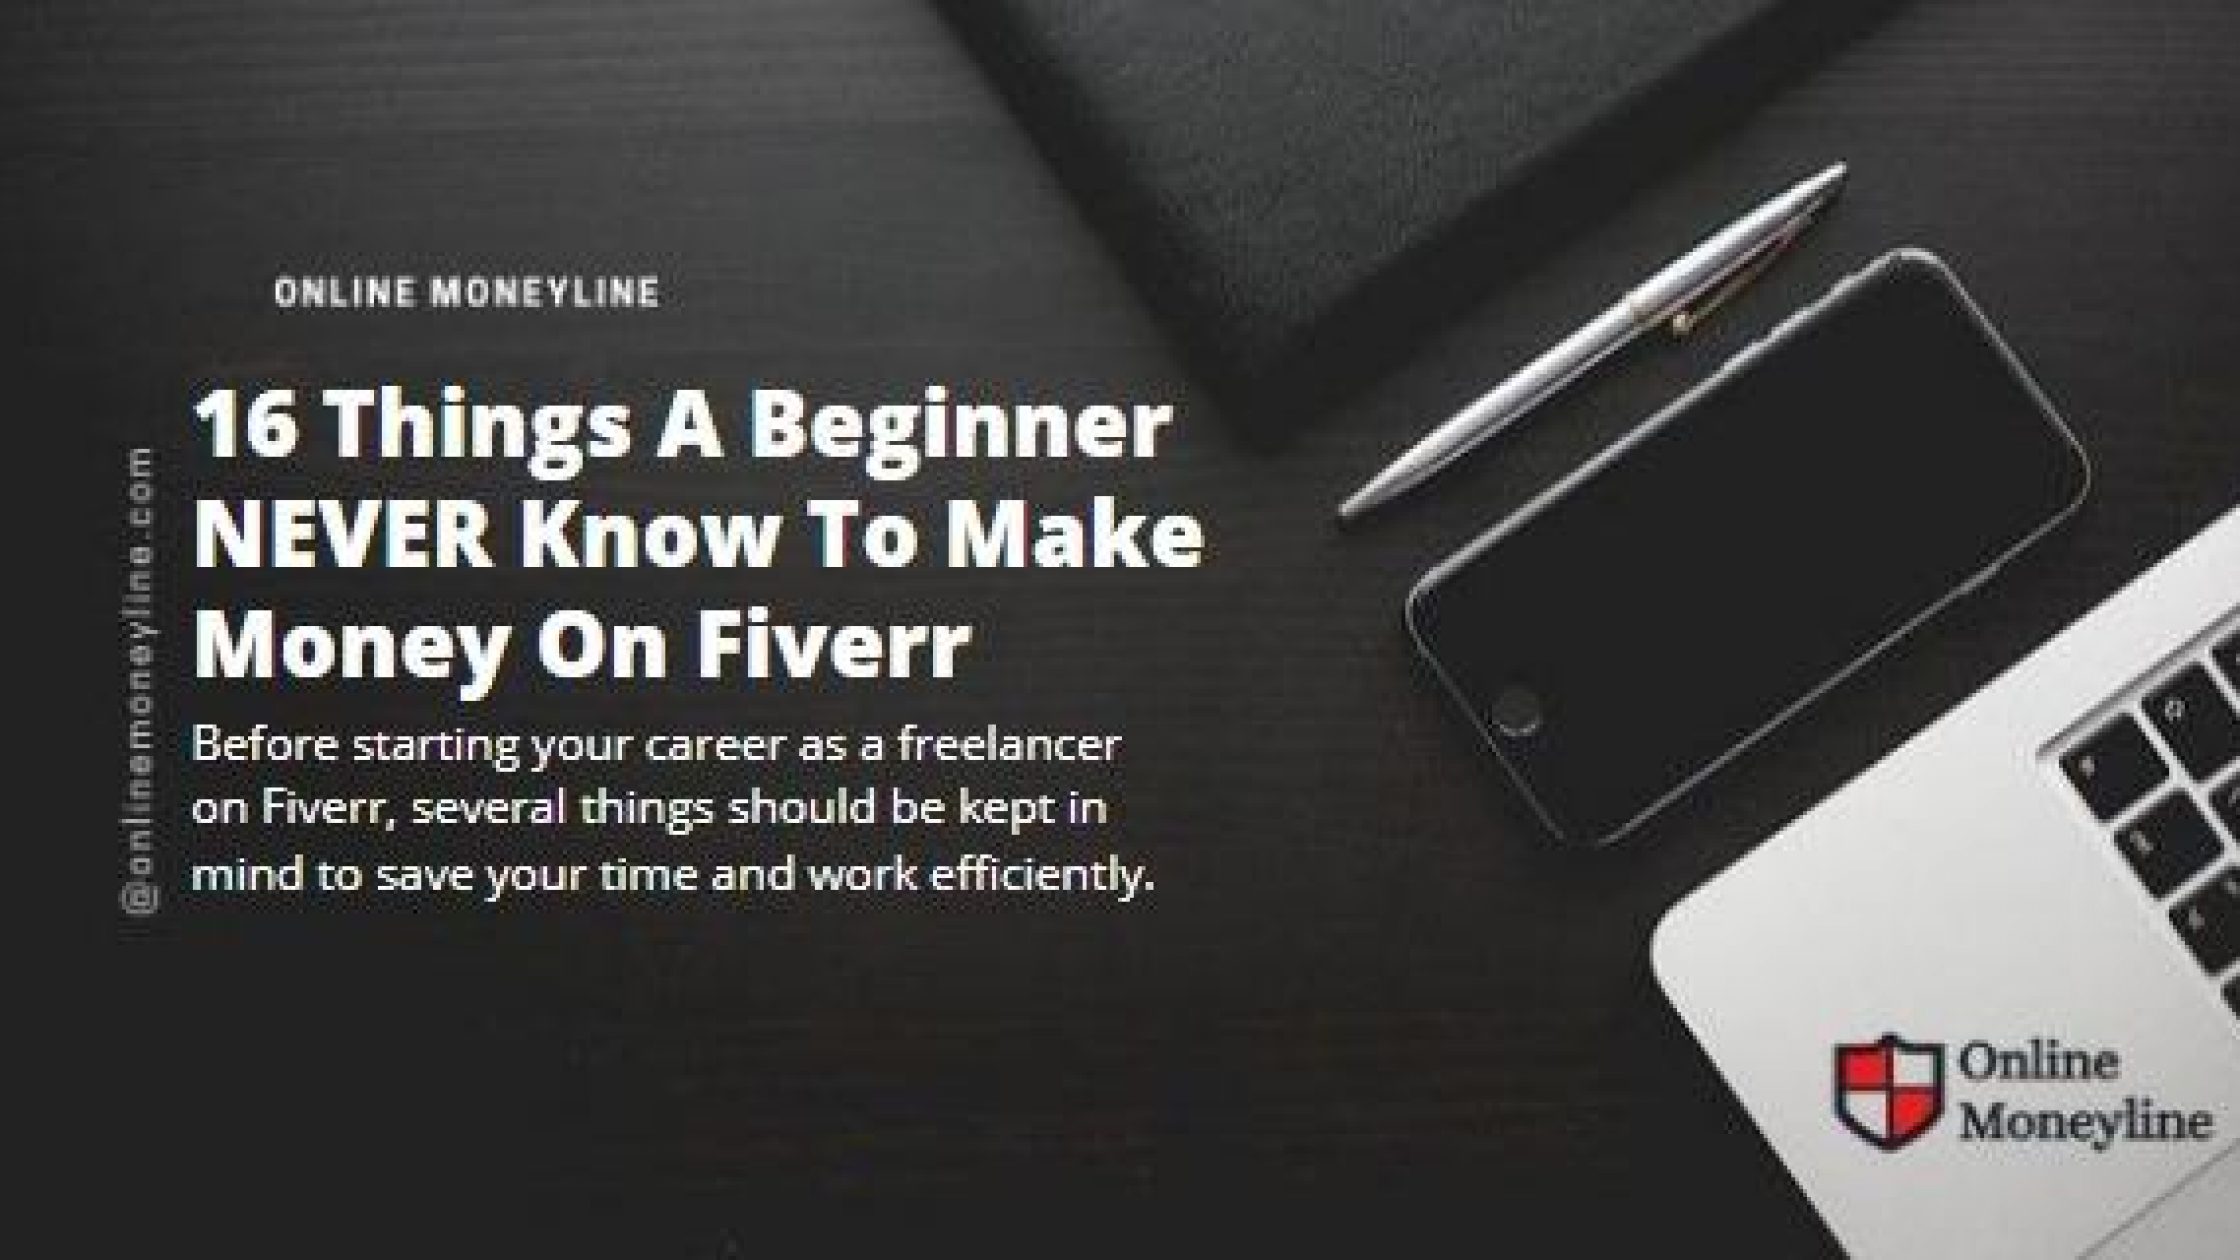 16 Things A Beginner NEVER Know To Make Money On Fiverr